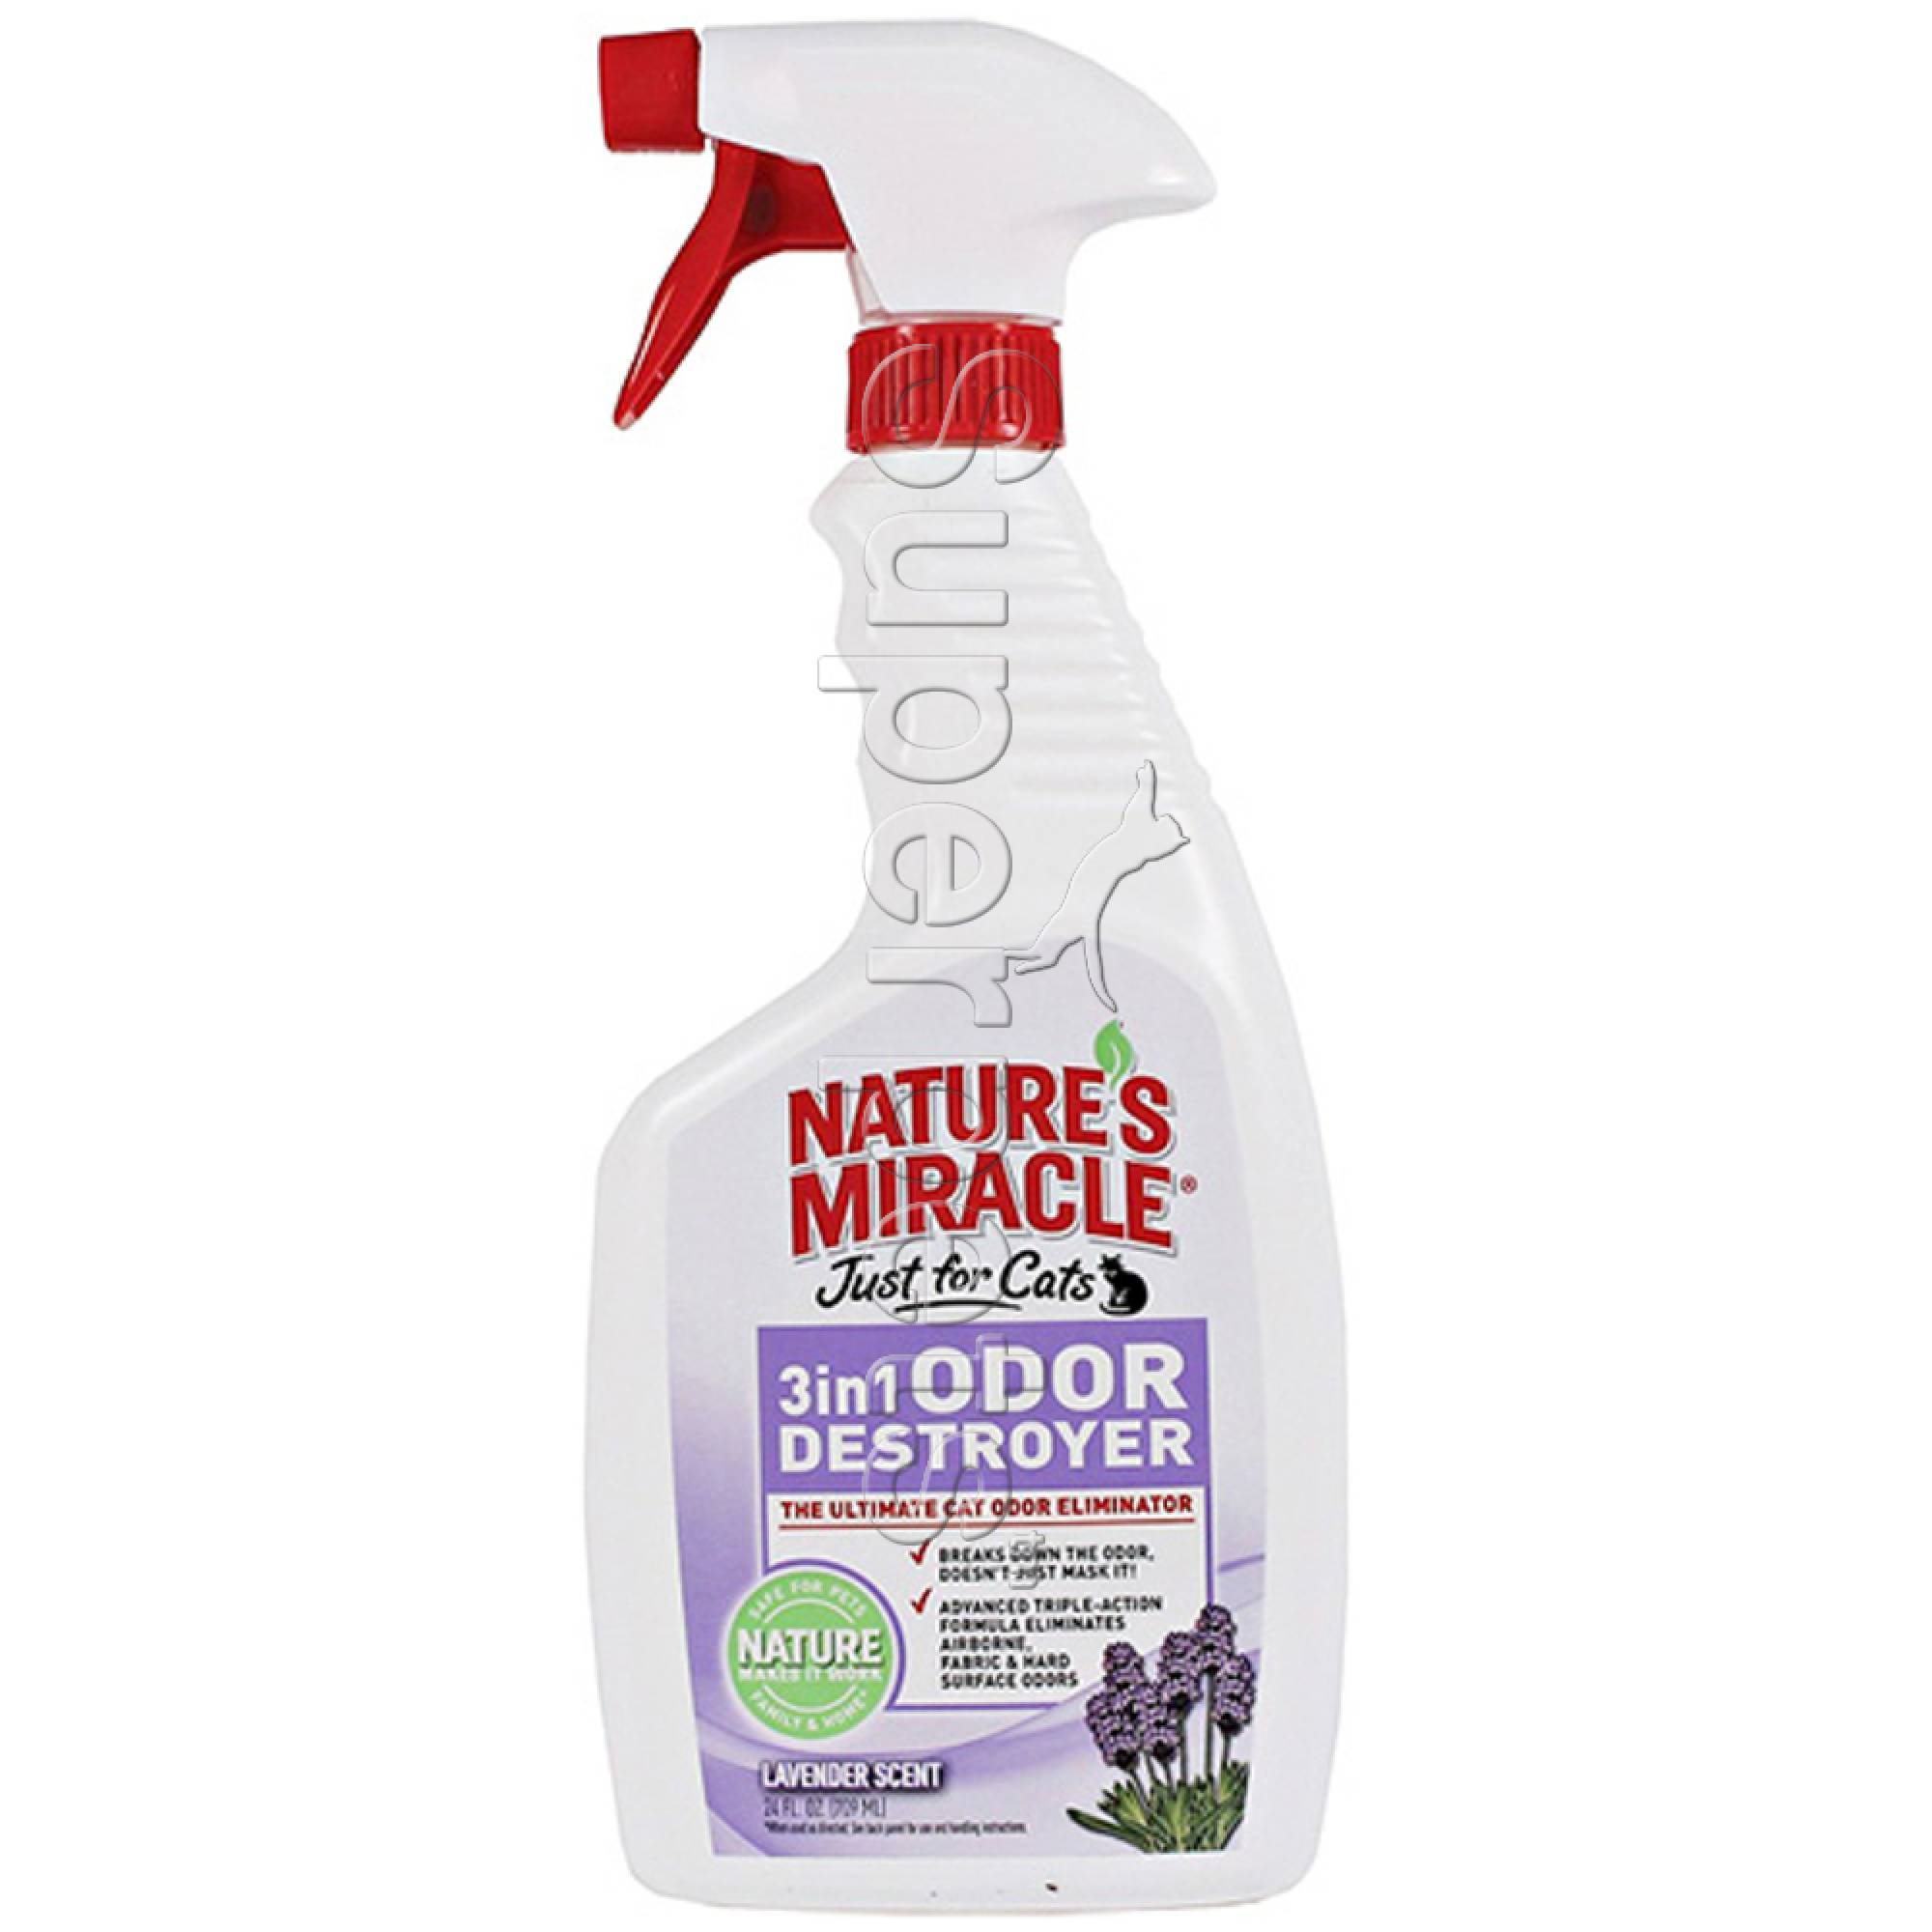 Nature's Miracle 3-in-1 Odor Destroyer Trigger Spray Just for Cats - Lavender 24oz (709ml)